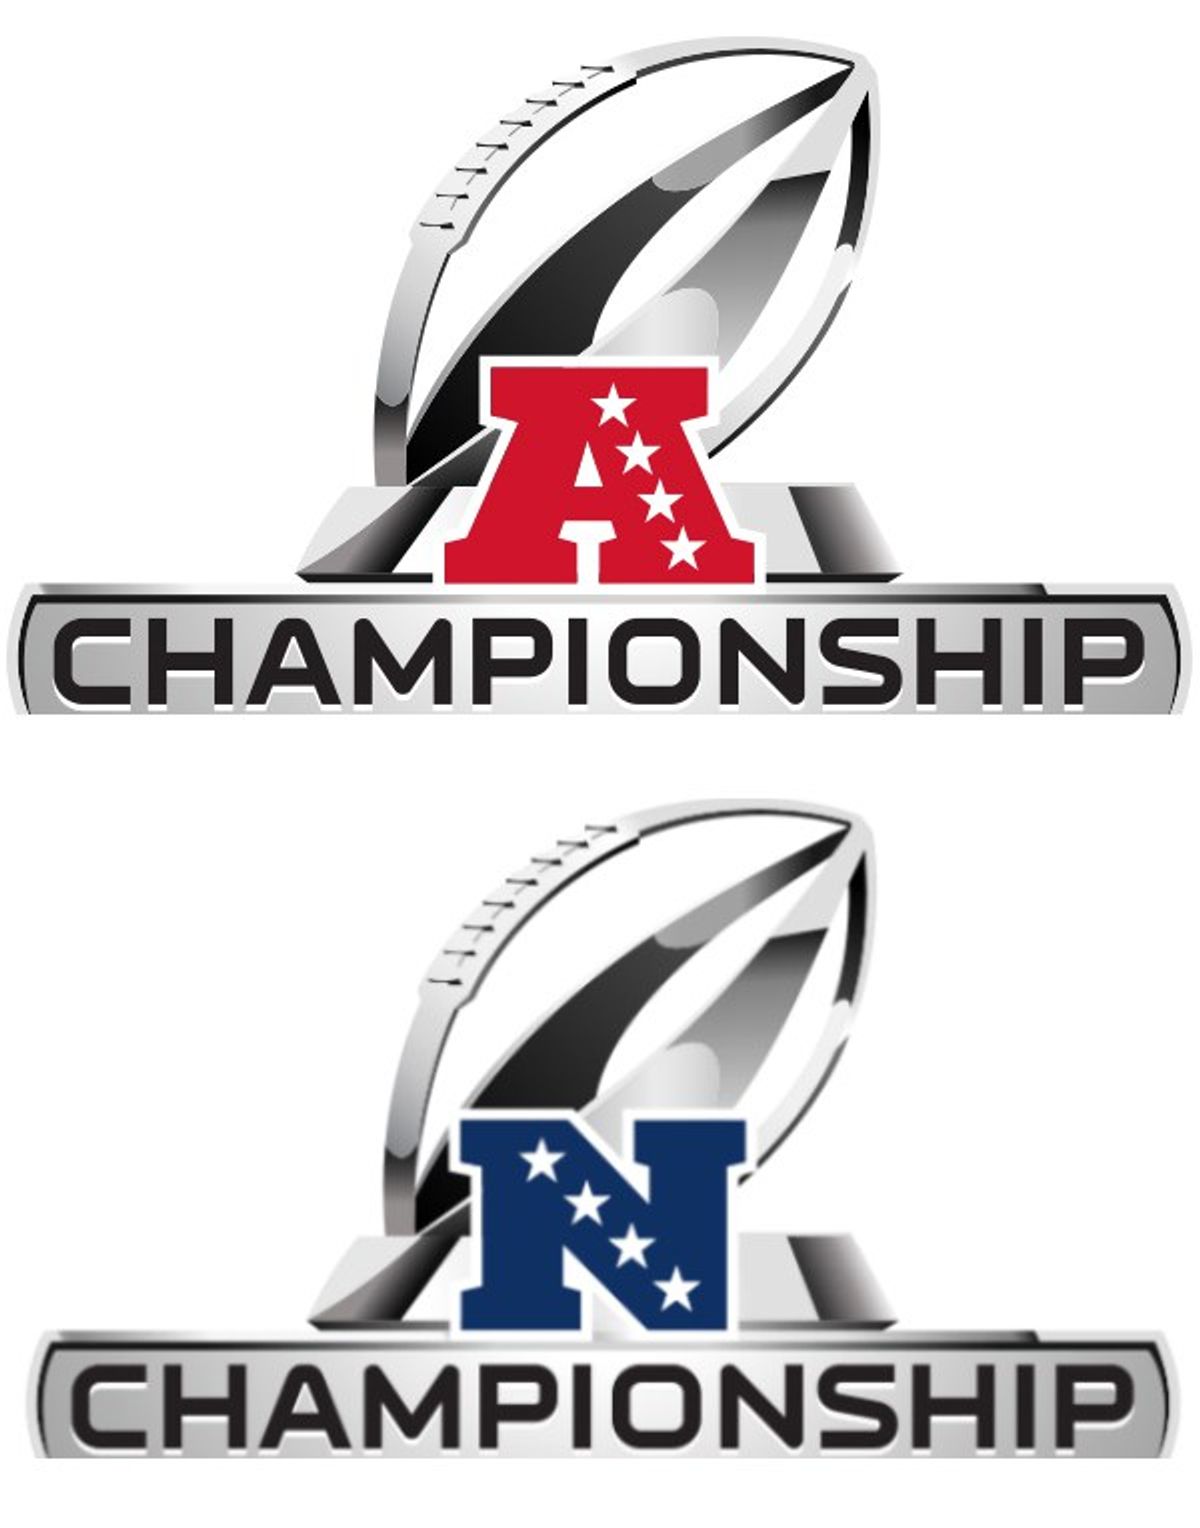 NFL Playoff Predictions: Conference Championship Round